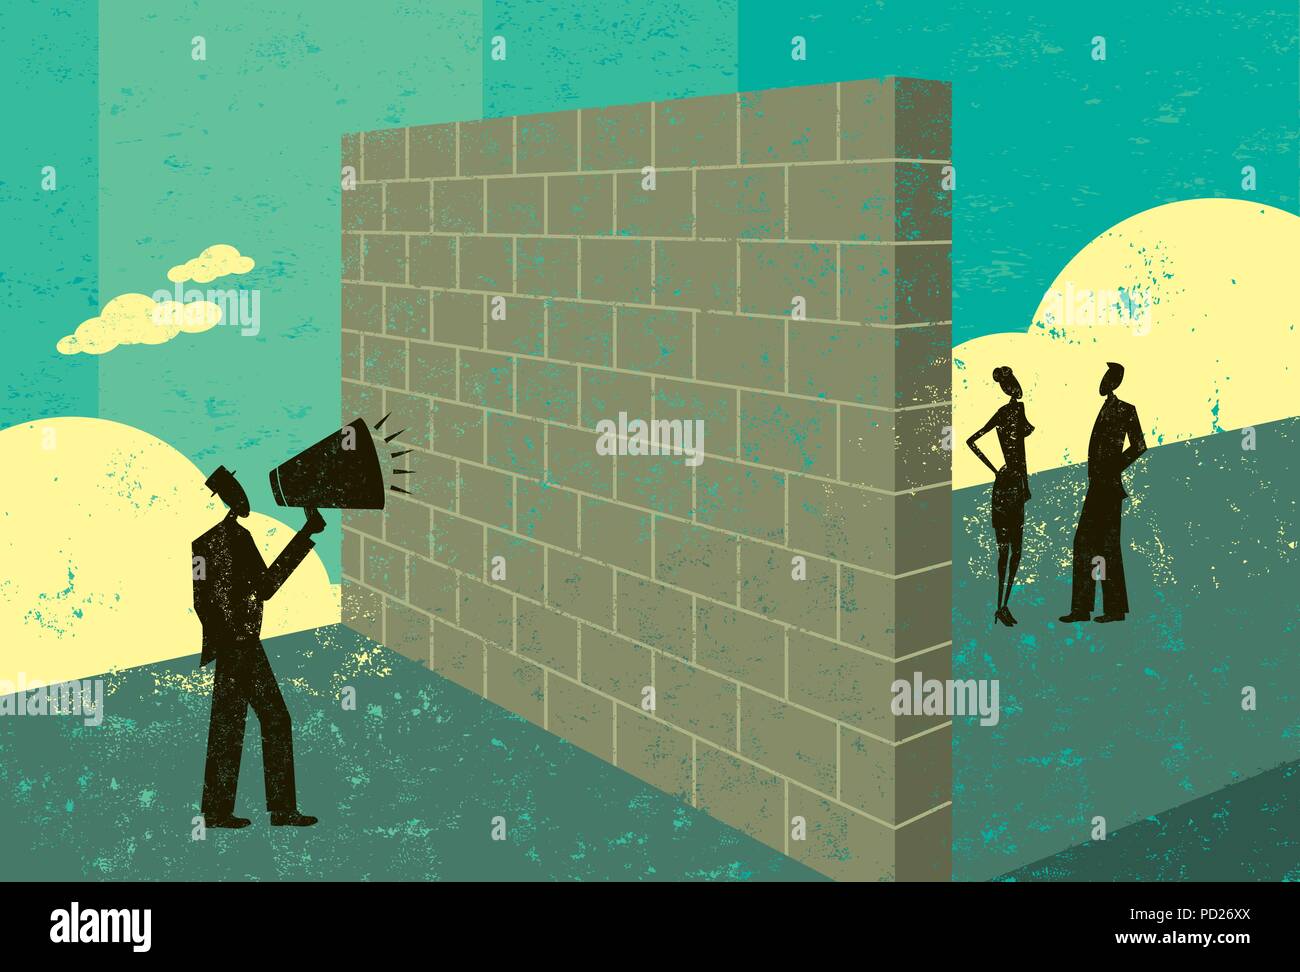 Shouting at a brick wall A businessman shouting at a brick wall which represents a barrier to his ability to reach potential clients. Stock Vector